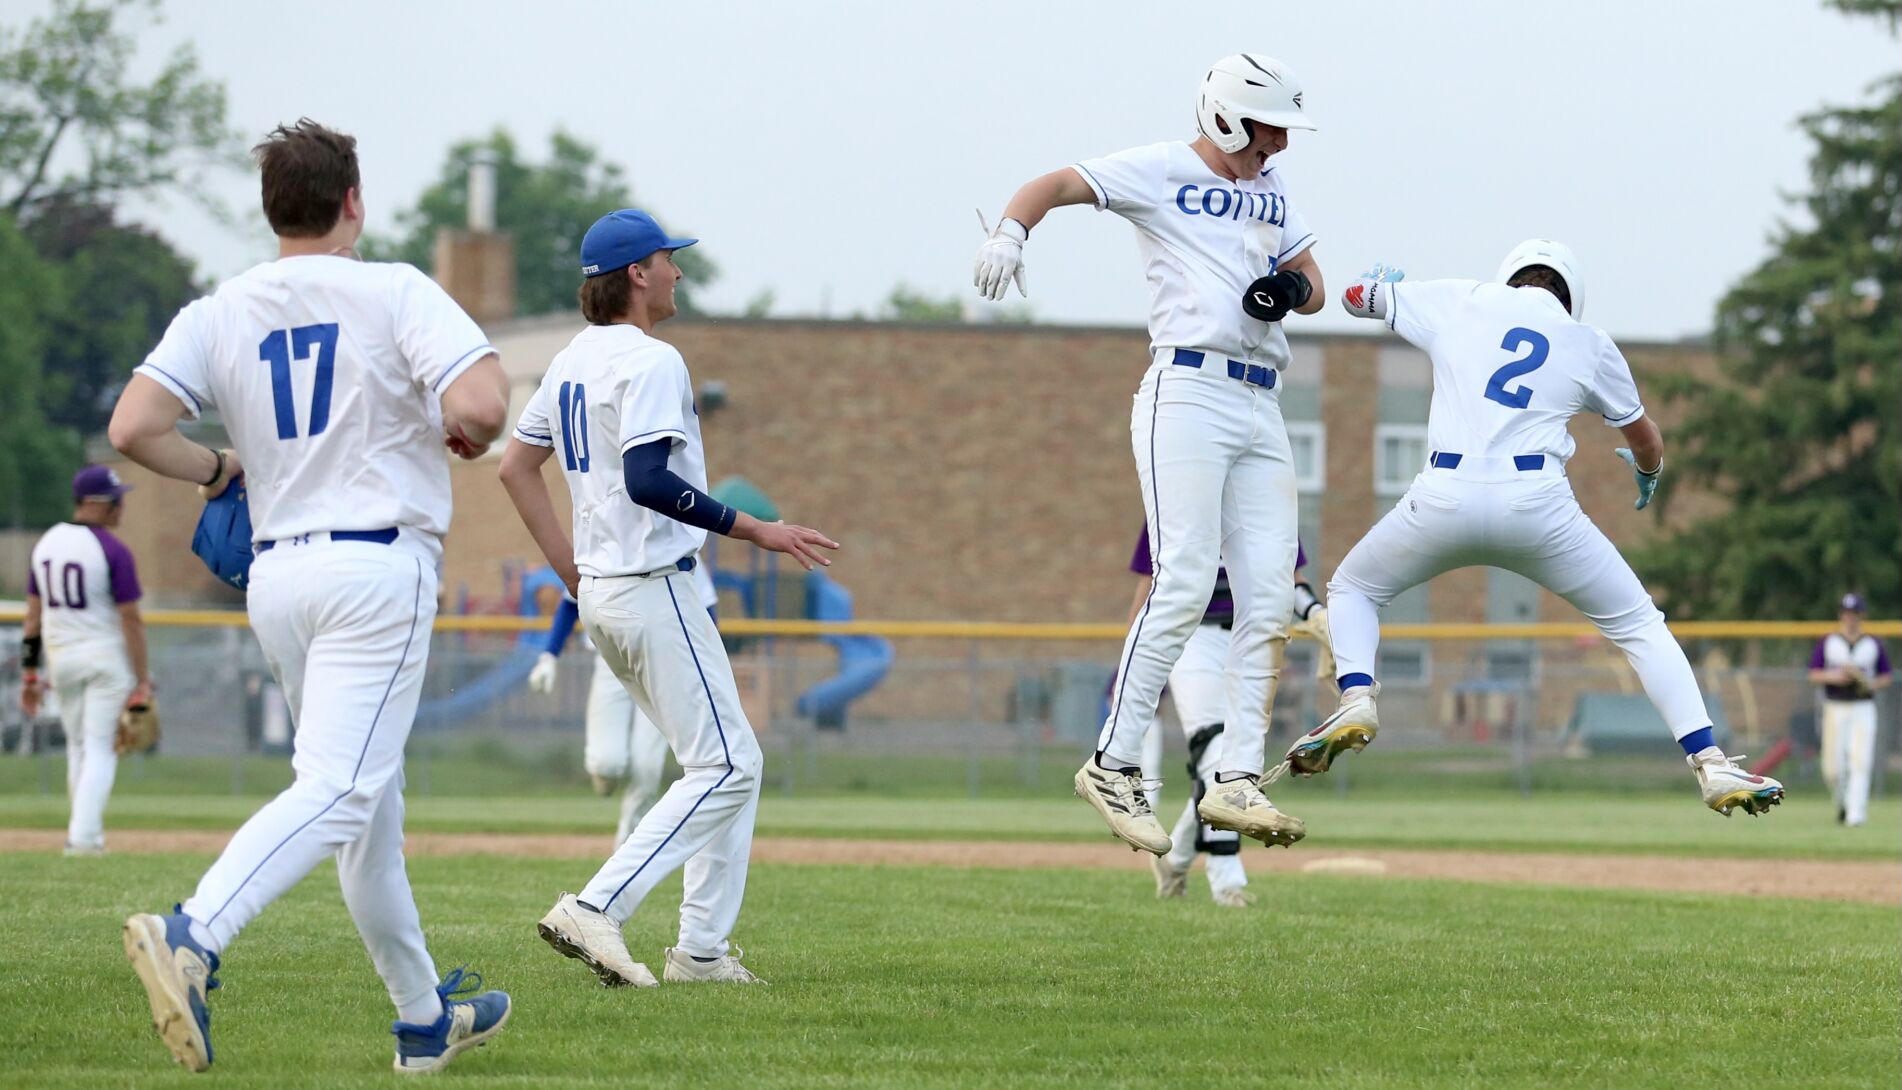 Exciting High School Sports Highlights: Cotter Baseball’s Extra-Inning Win & Winona’s Impressive Victories